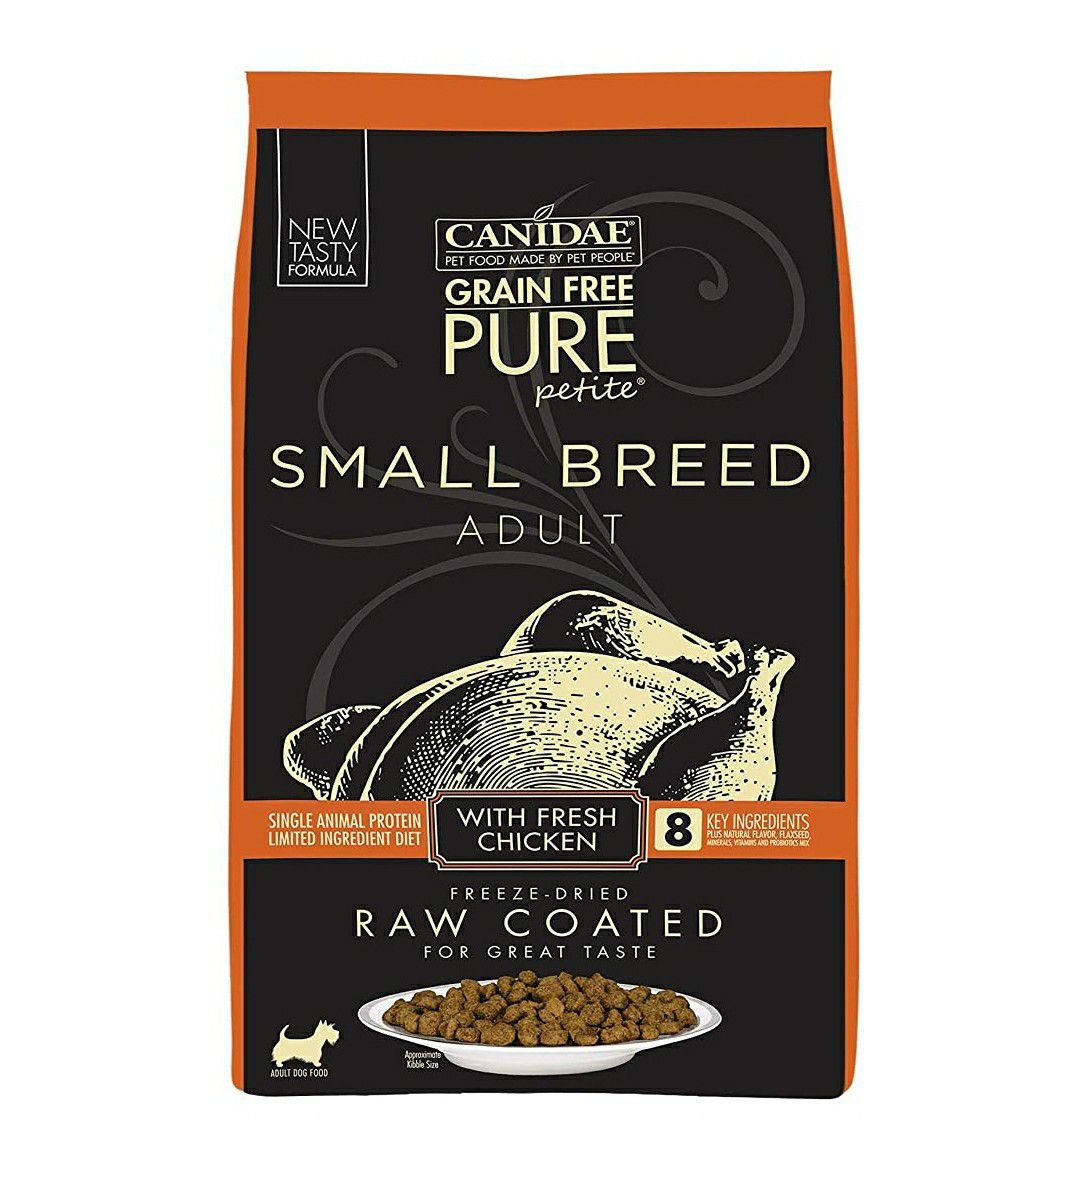 DOG FOOD CANIDAE Grain Free Pure Petite Small Breed Raw Coated Dry Dog Food